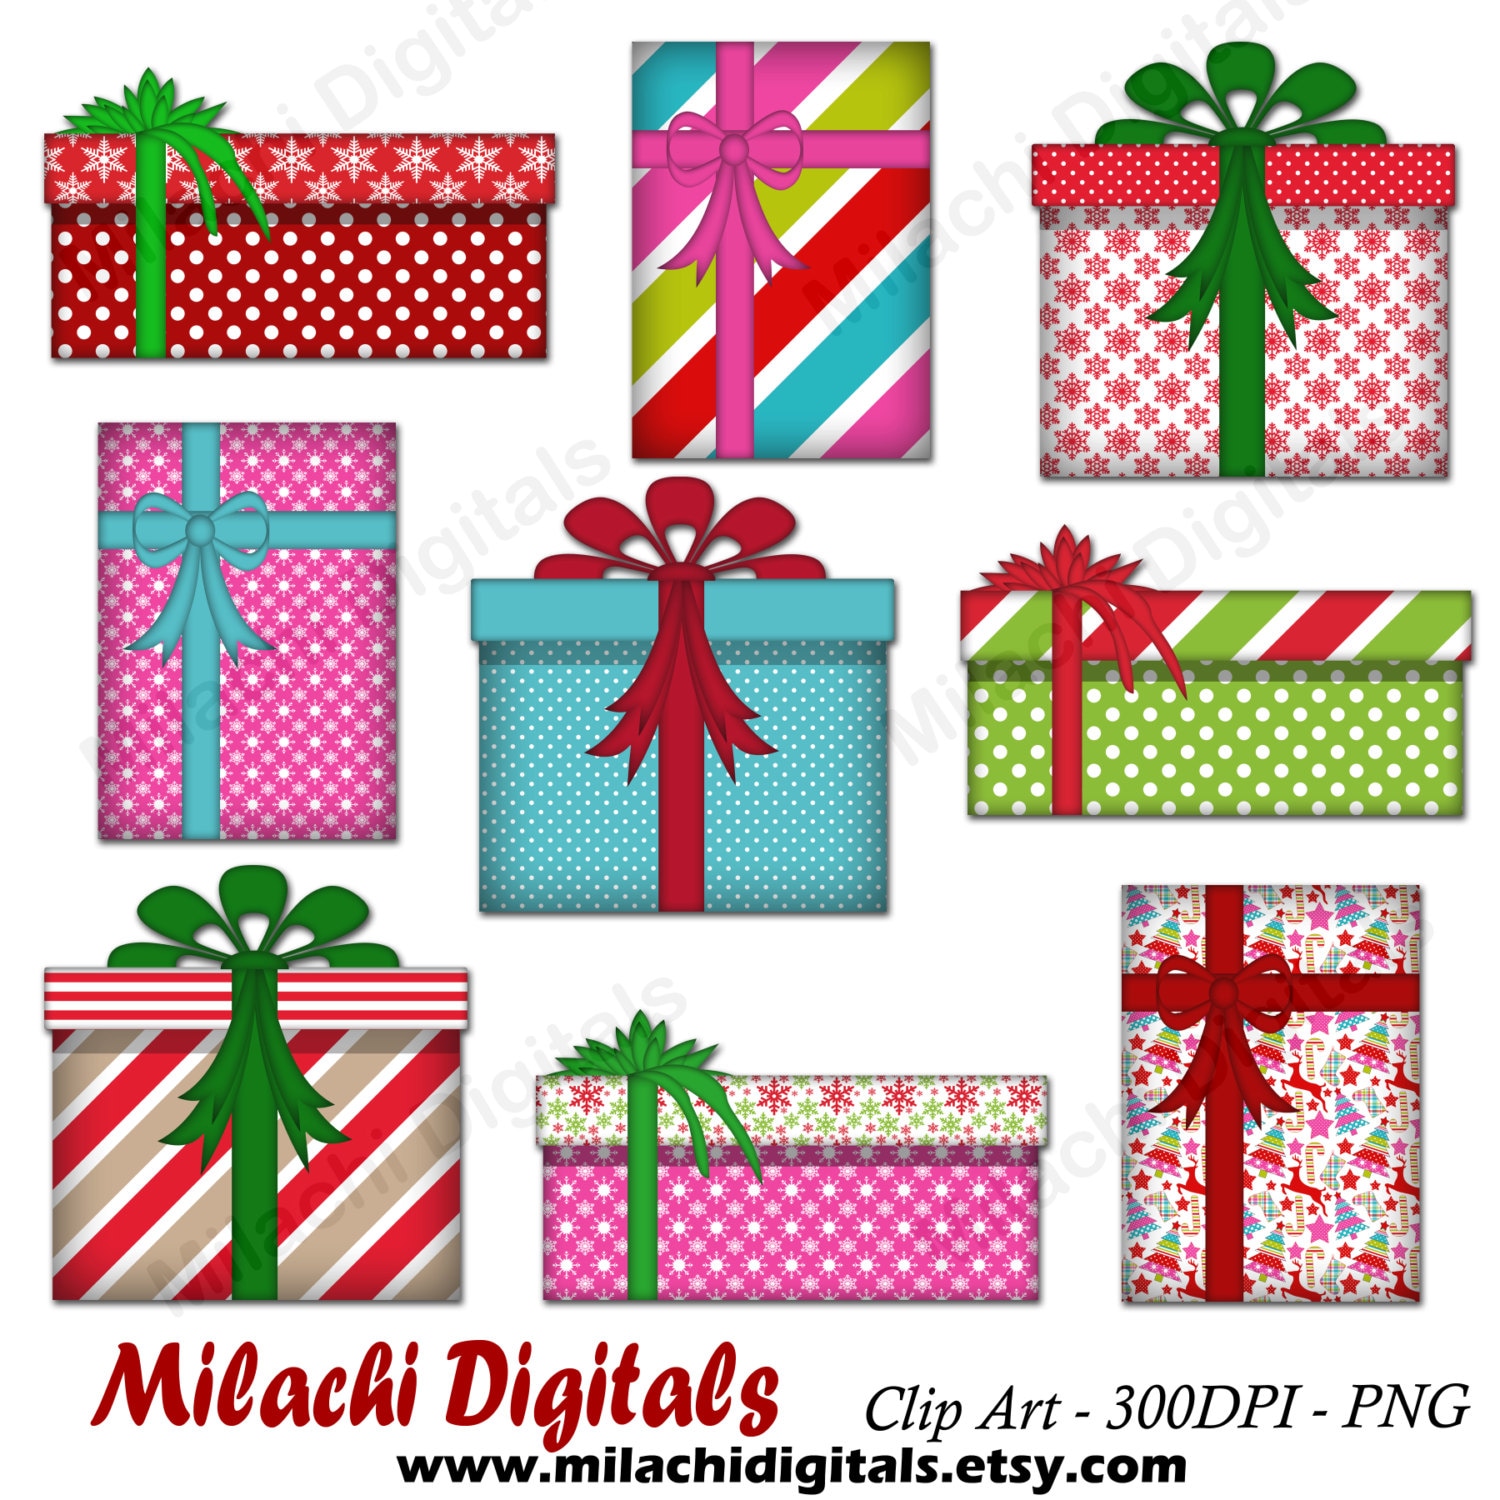 How To Draw A Gift Present Easy - Step By Step Drawing Christmas Gifts  Clipart, clipart, png clipart